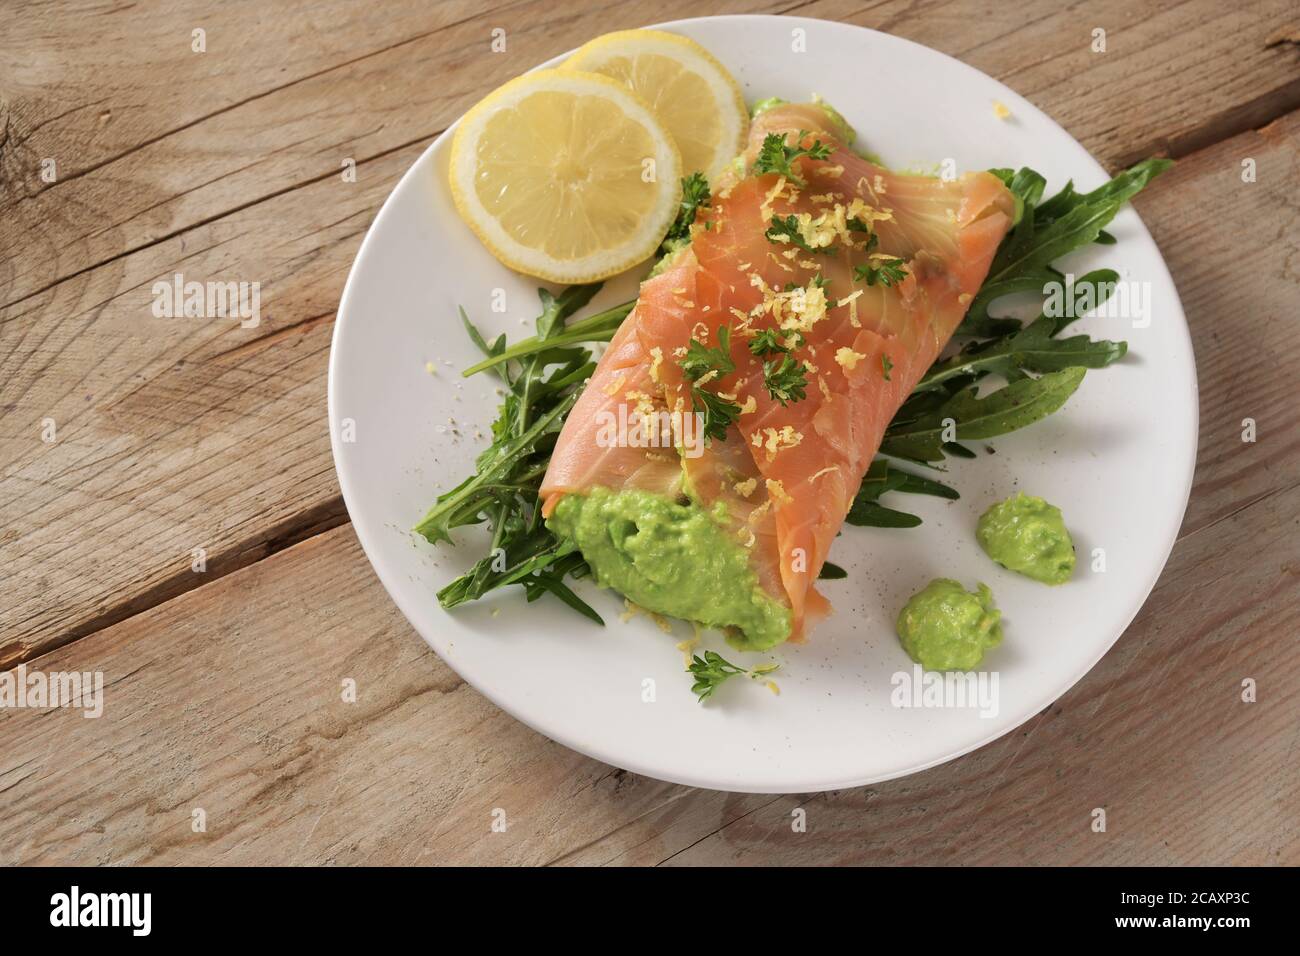 Smoked salmon filled with pea puree on arugula salad with lemon slices and parsley garnish on a rustic wooden table, healthy low carb diet, copy space Stock Photo